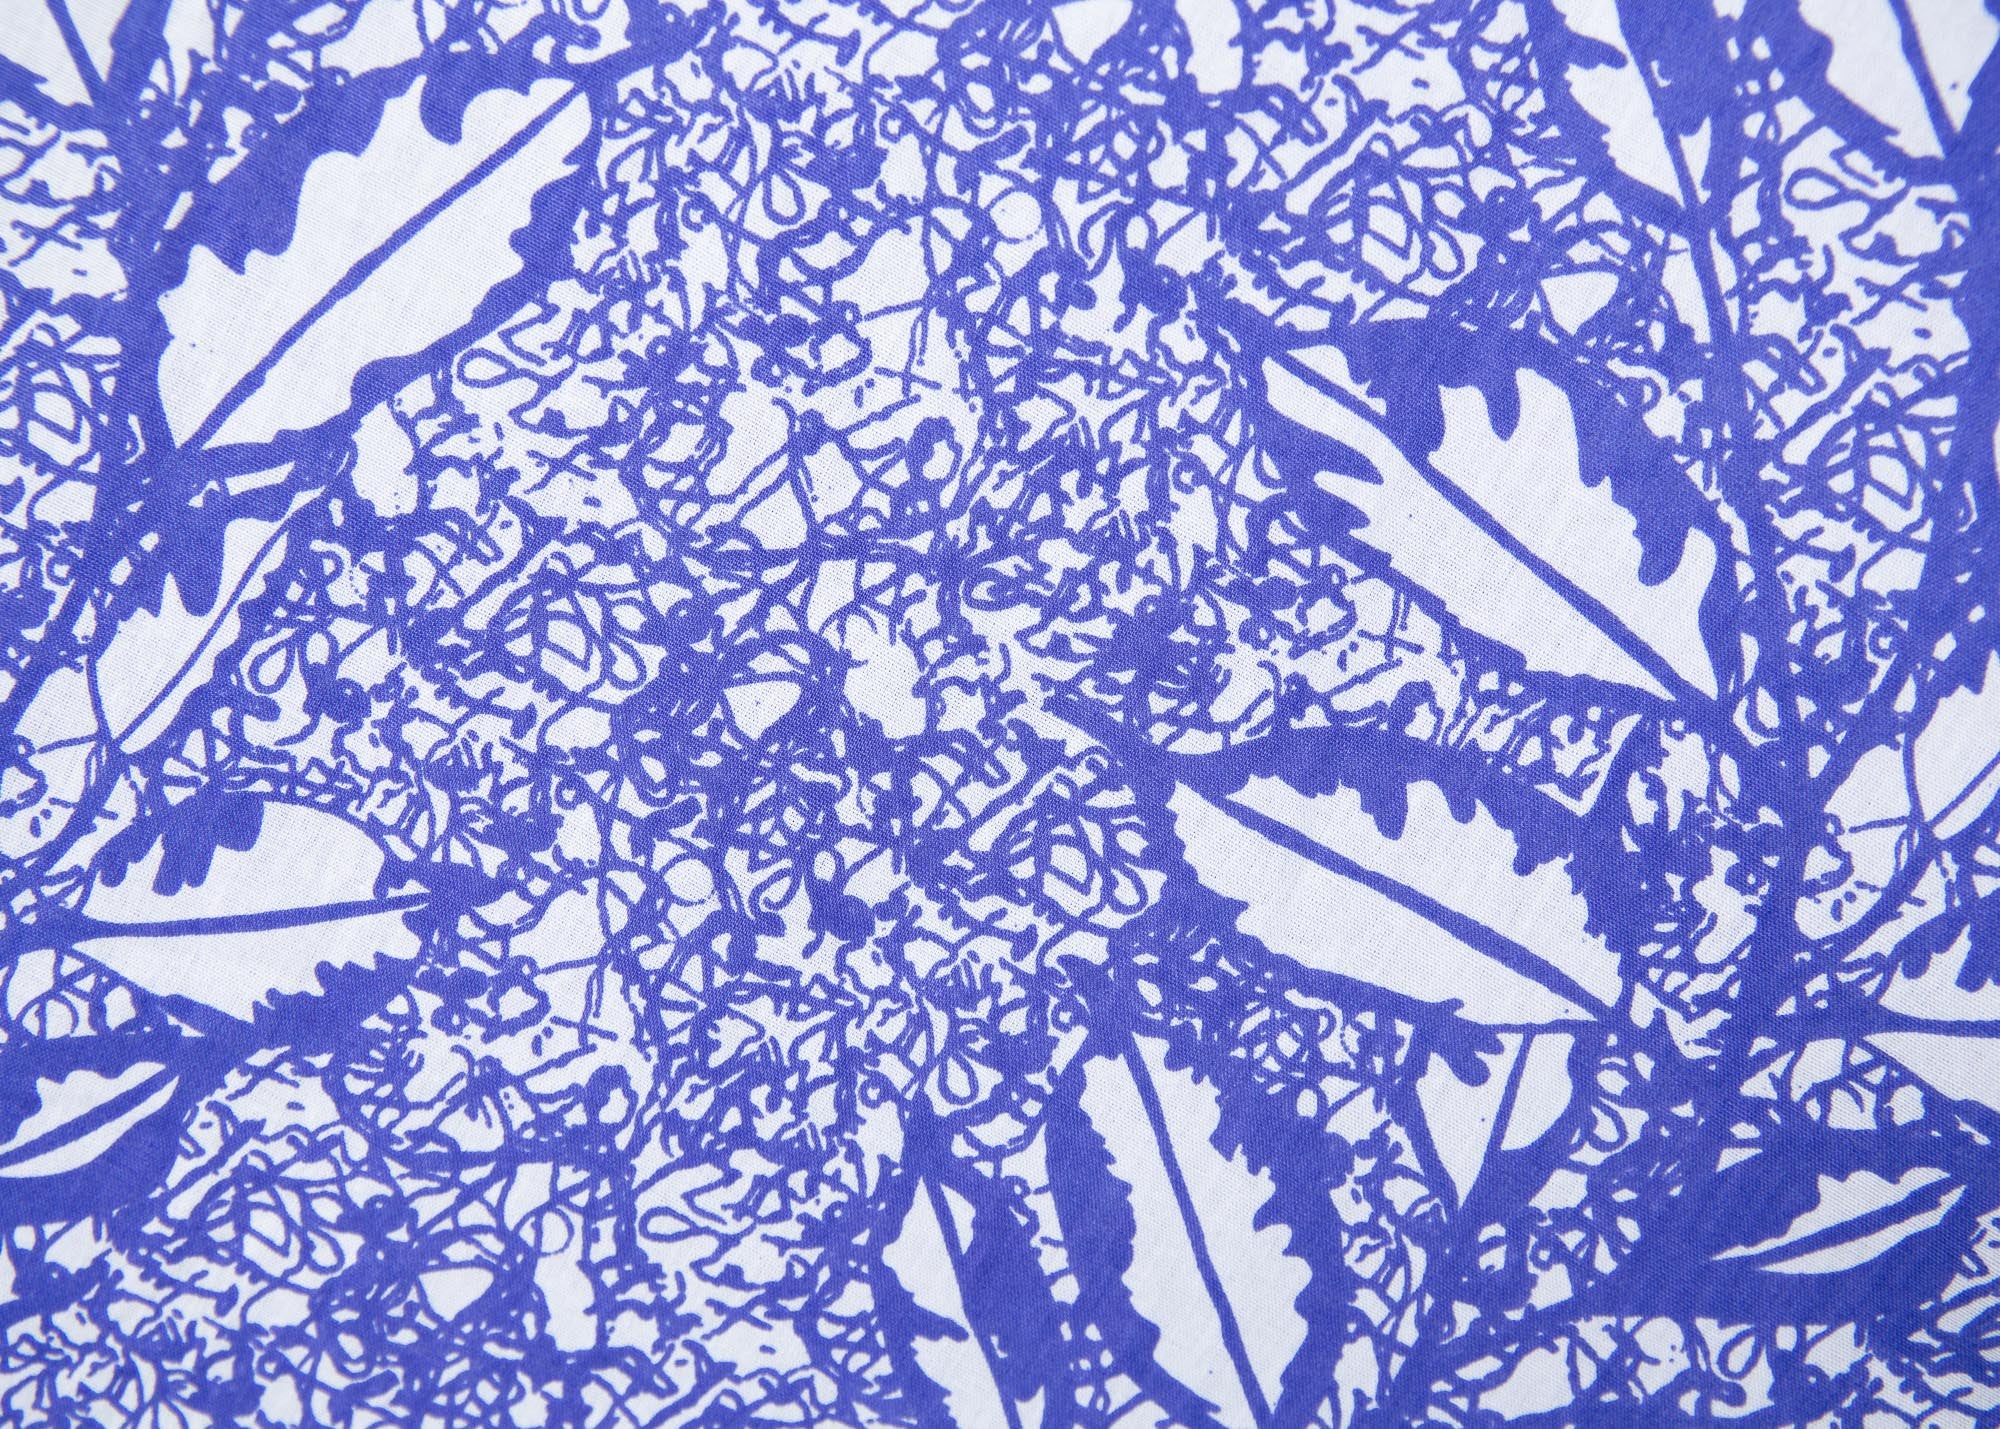 Close up display of violet and white leaf print dress